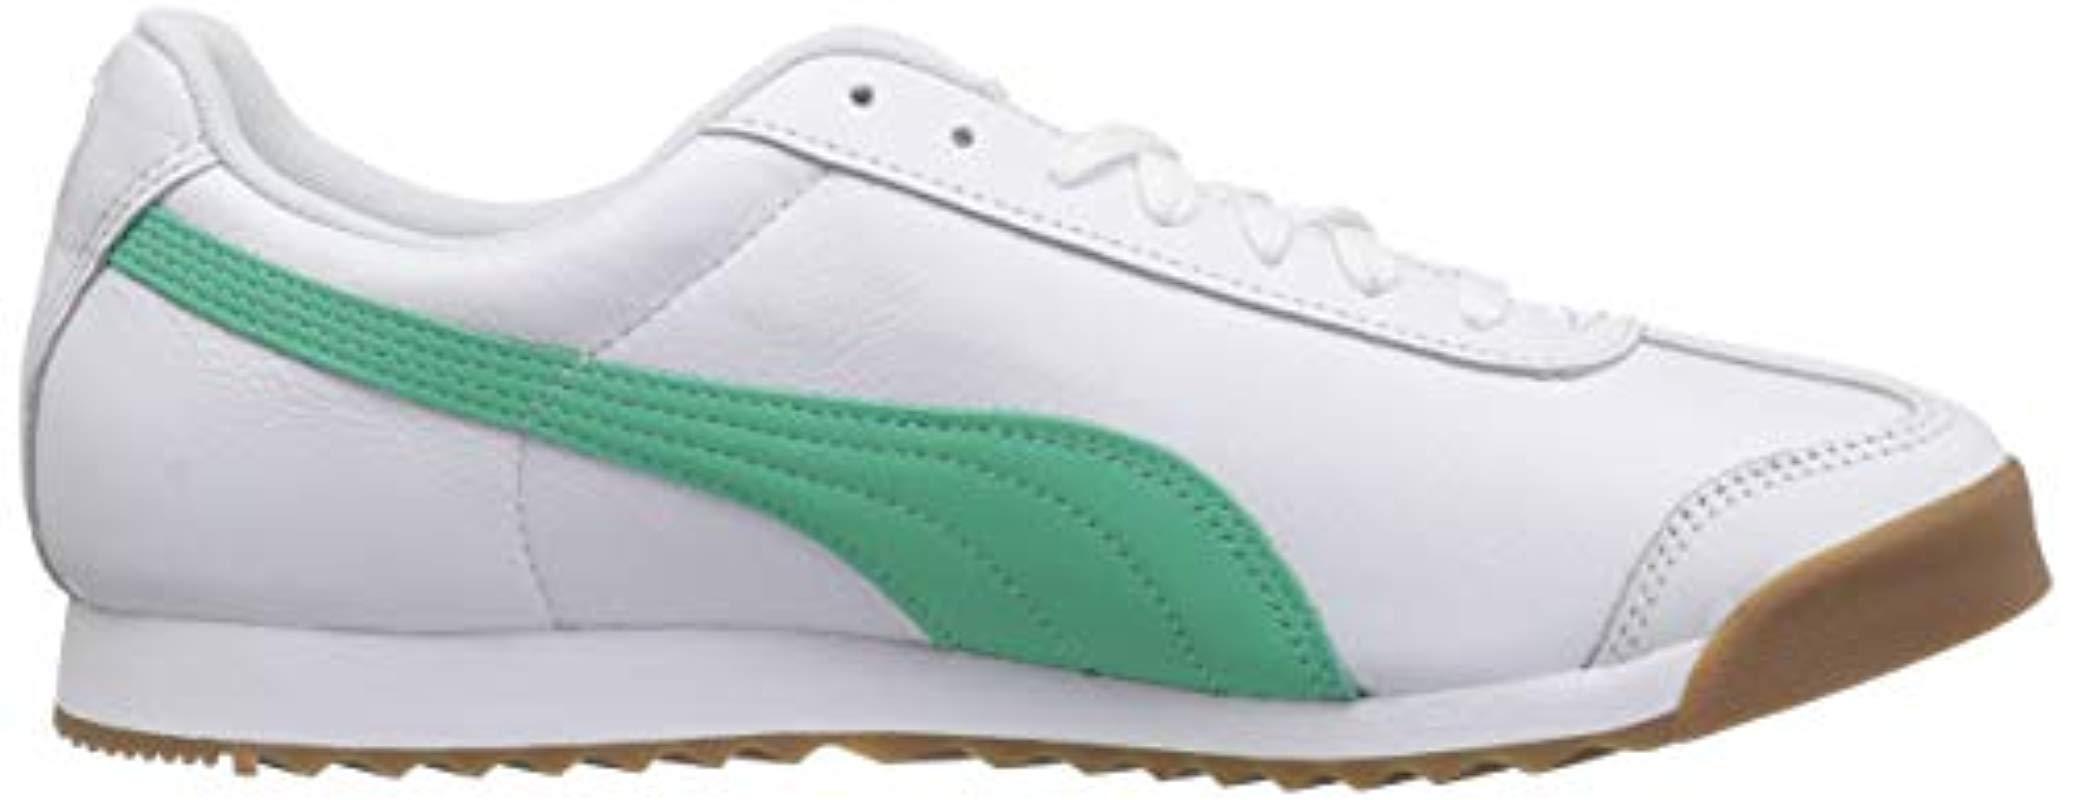 PUMA Leather Roma Basic Sneaker in Green for Men - Lyst